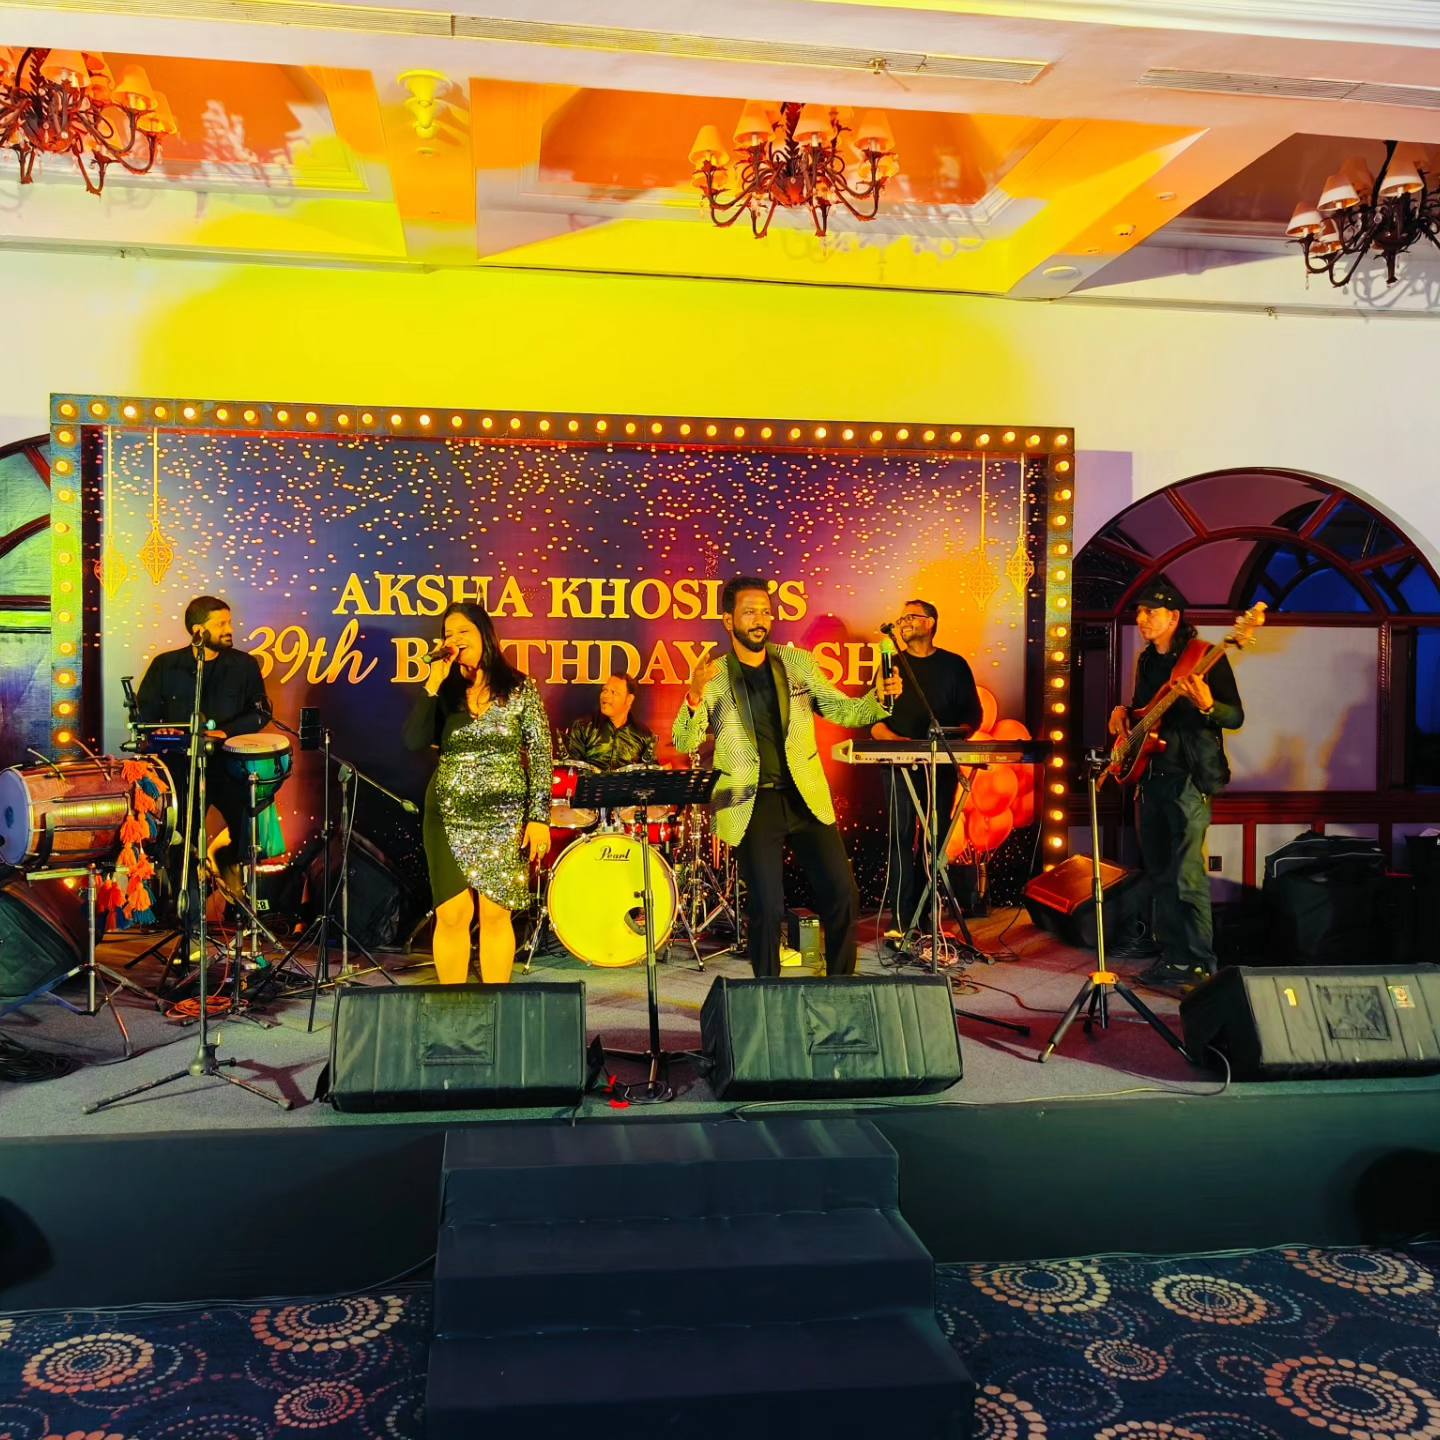 Monty n Music Mantra - For Weddings, Corporate Events, Private Parties, Concerts, Festivals and Other Events.